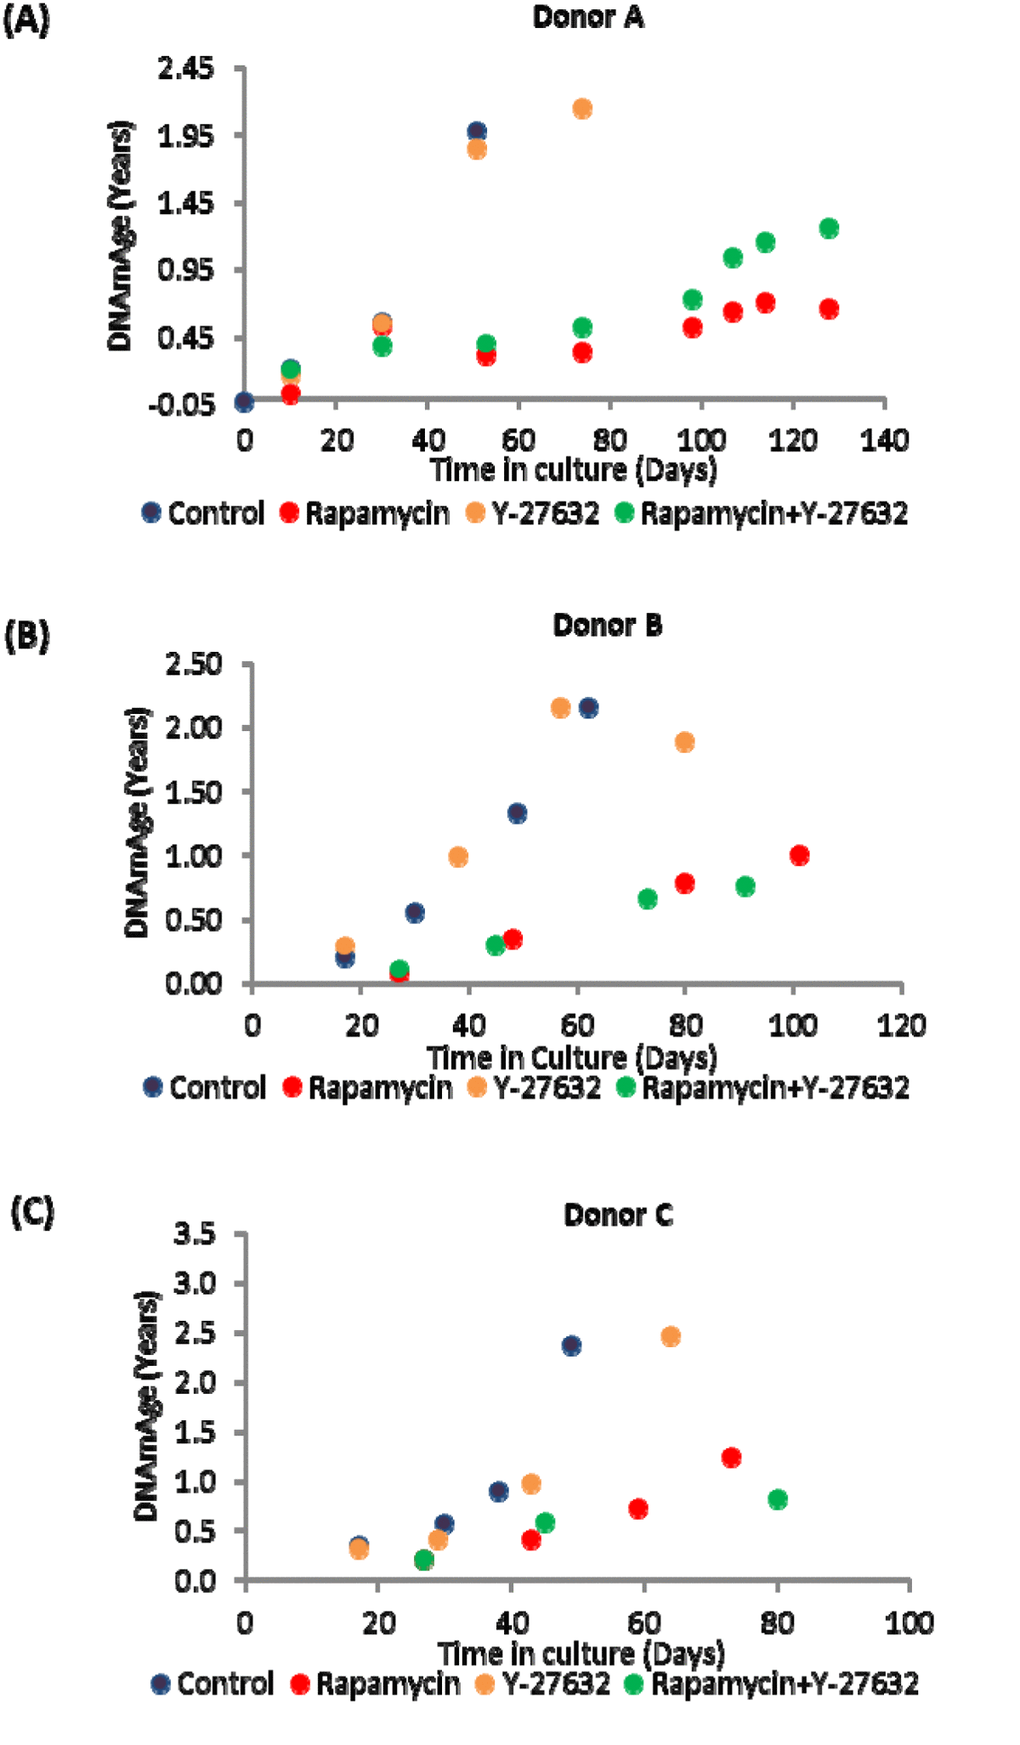 Ageing dynamics of keratinocytes of (A) Donor A, (B) Donor B and (C) Donor C in the presence or absence of rapamycin and Y-27632. Methylation profiles of DNA from selected passages of each cell population were analysed and their ages estimated with the skin and blood clock. The colour allocated to each culture condition is preserved throughout for ease of comparison.